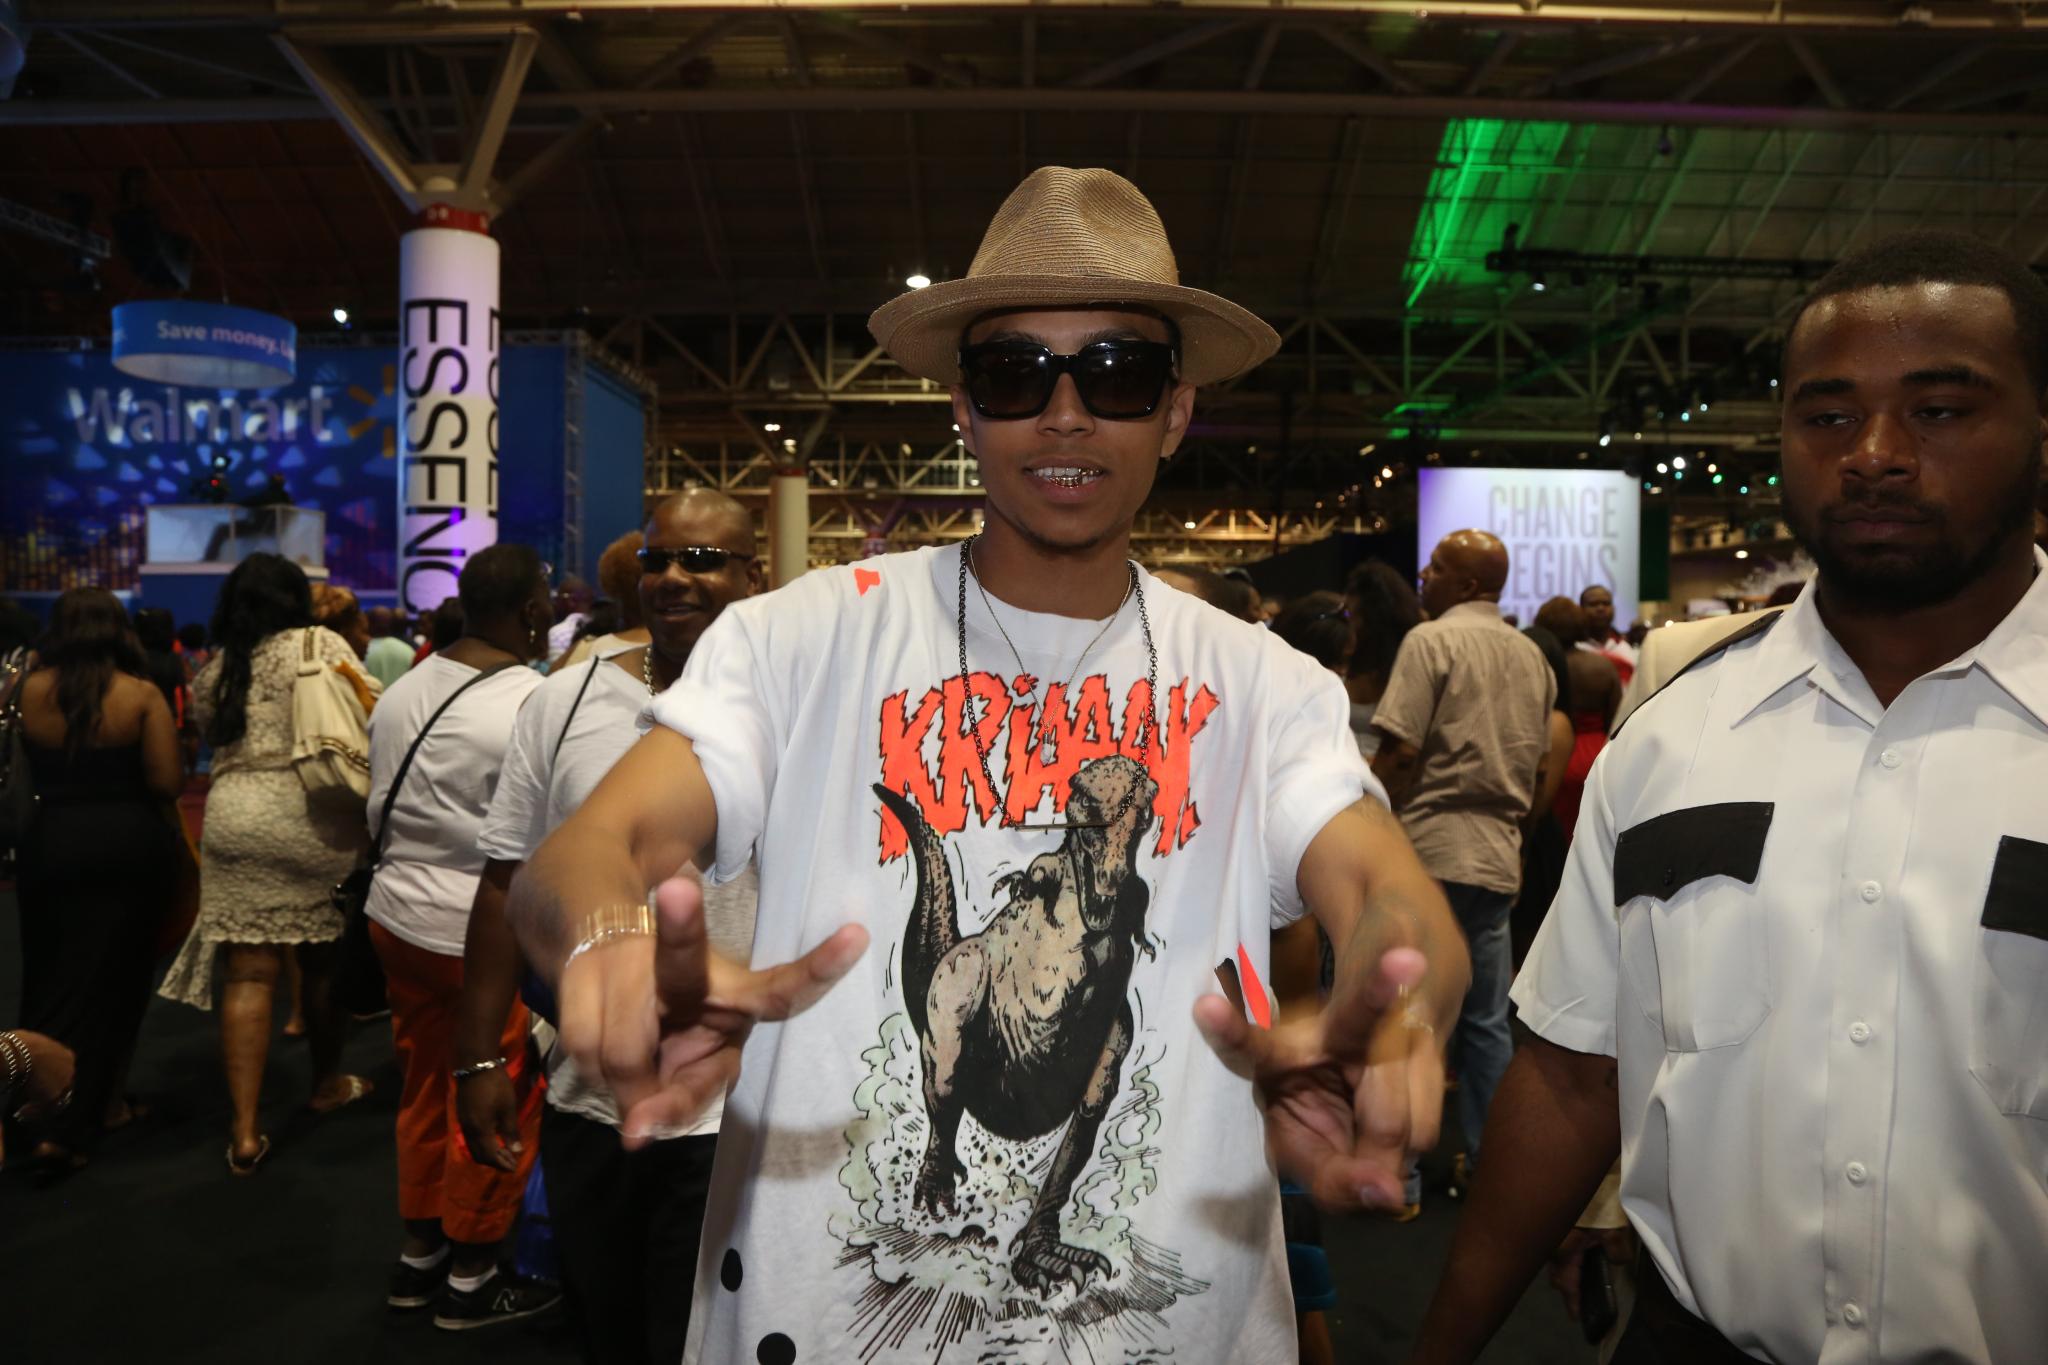 Here's What You Missed at the ESSENCE Festival's Convention Center